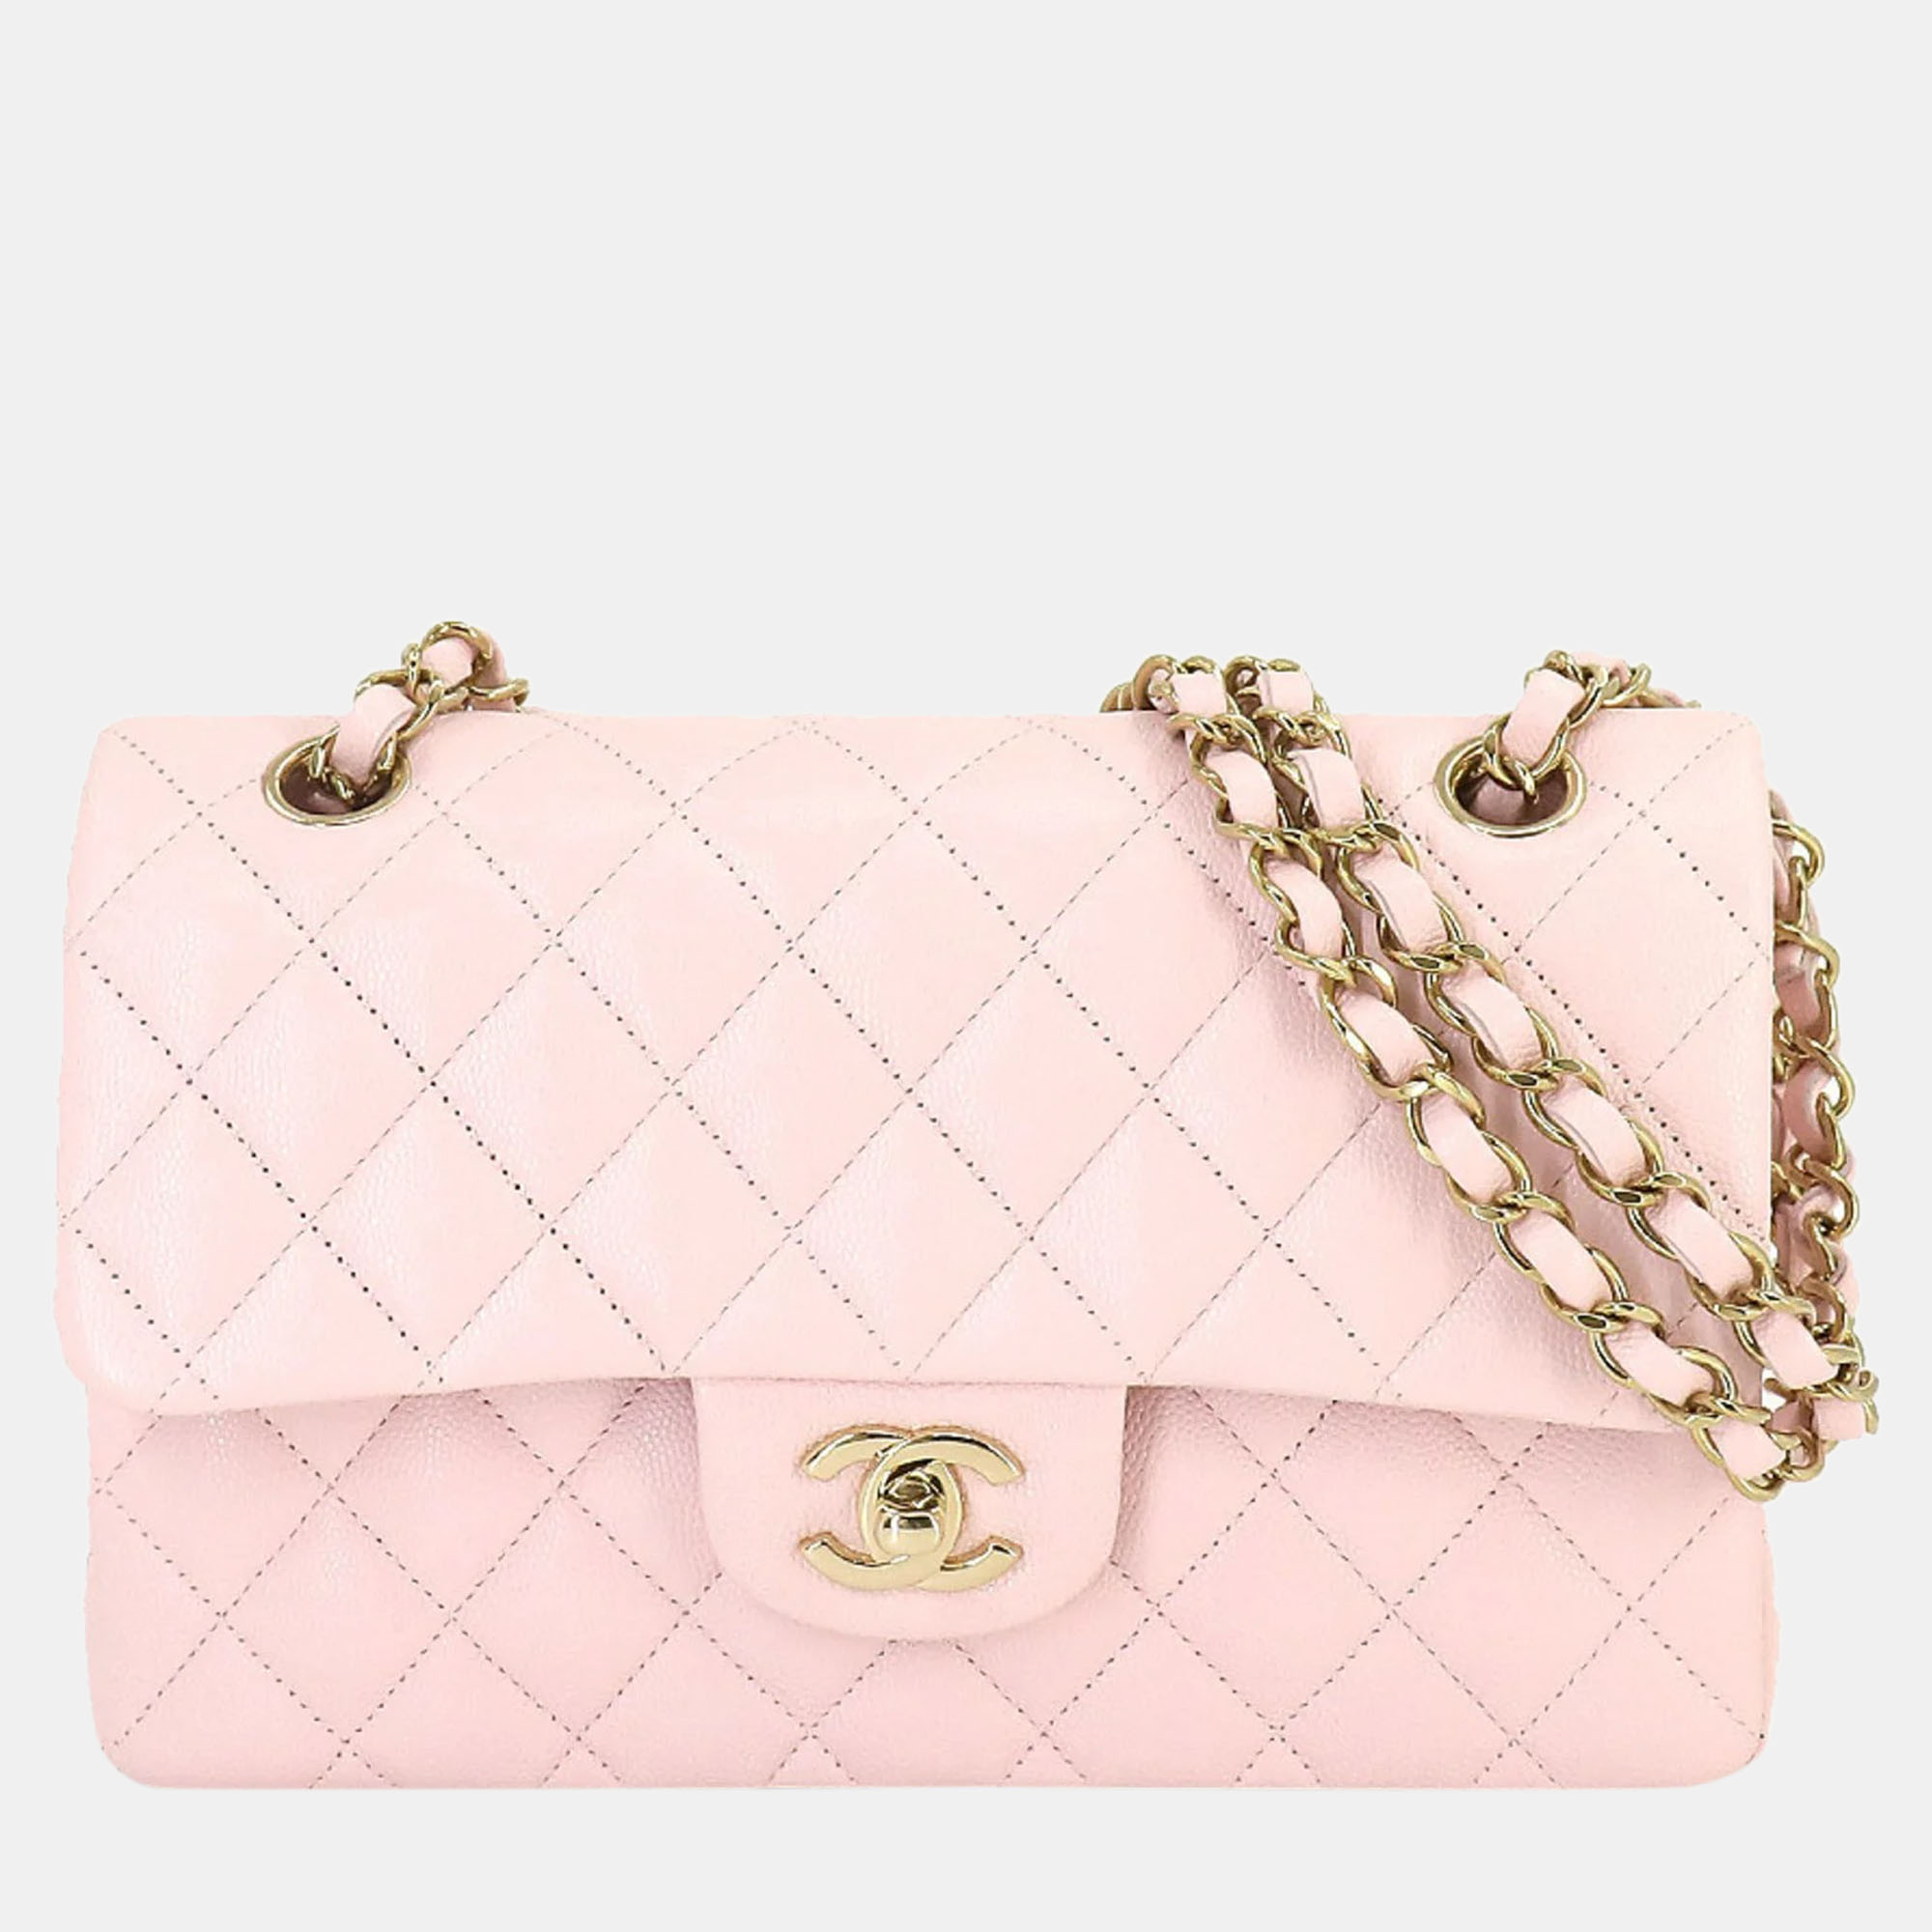 Chanel  lambskin leather classic double flap shoulder bags